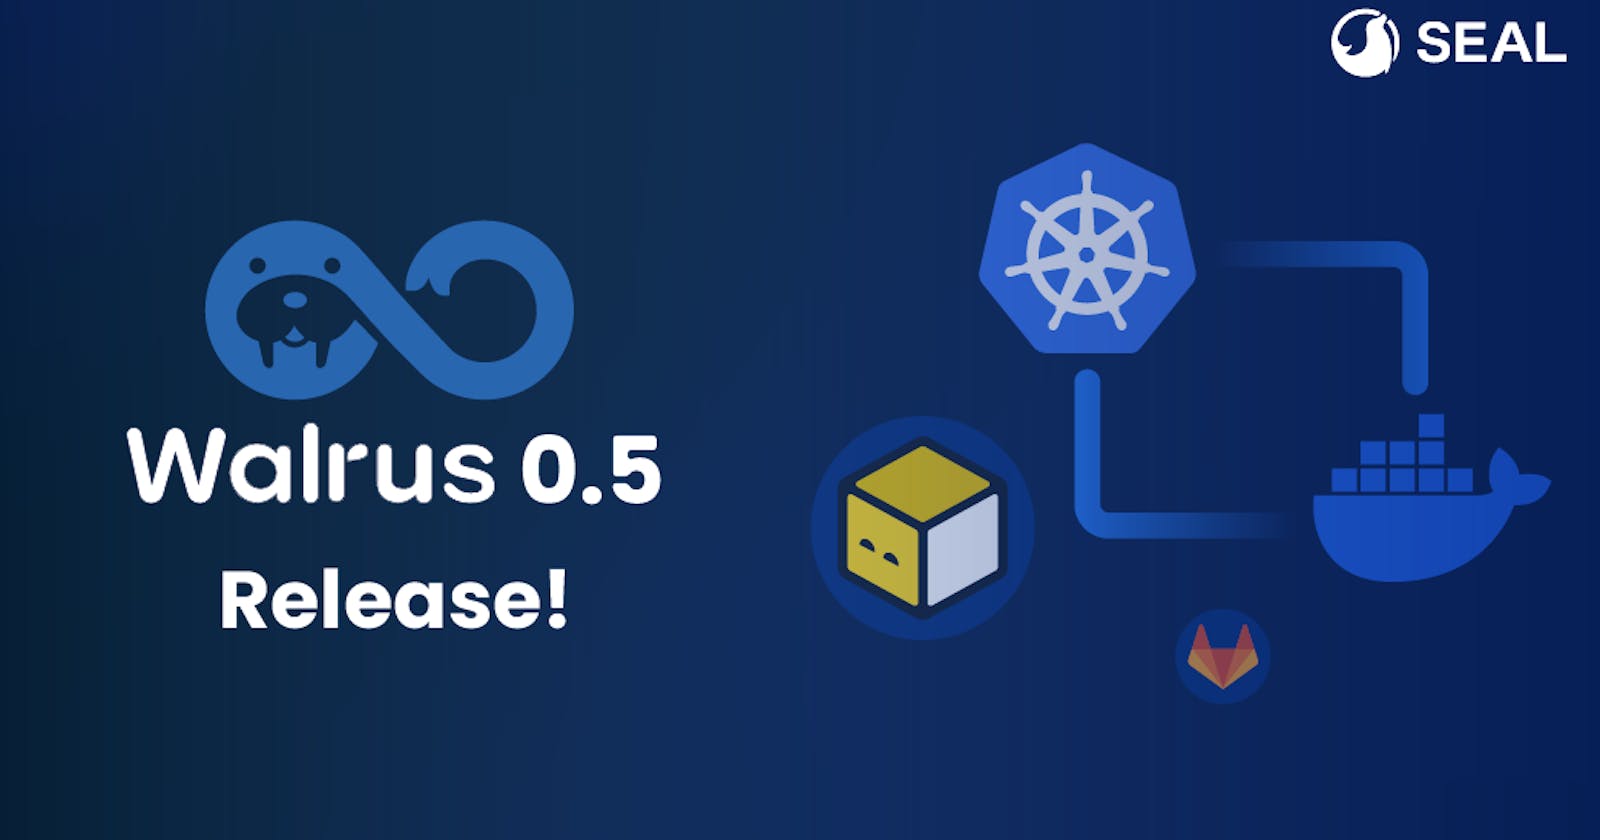 Seal Launches Walrus 0.5: Revamps Workflow for an Out-of-the-Box Deployment Experience